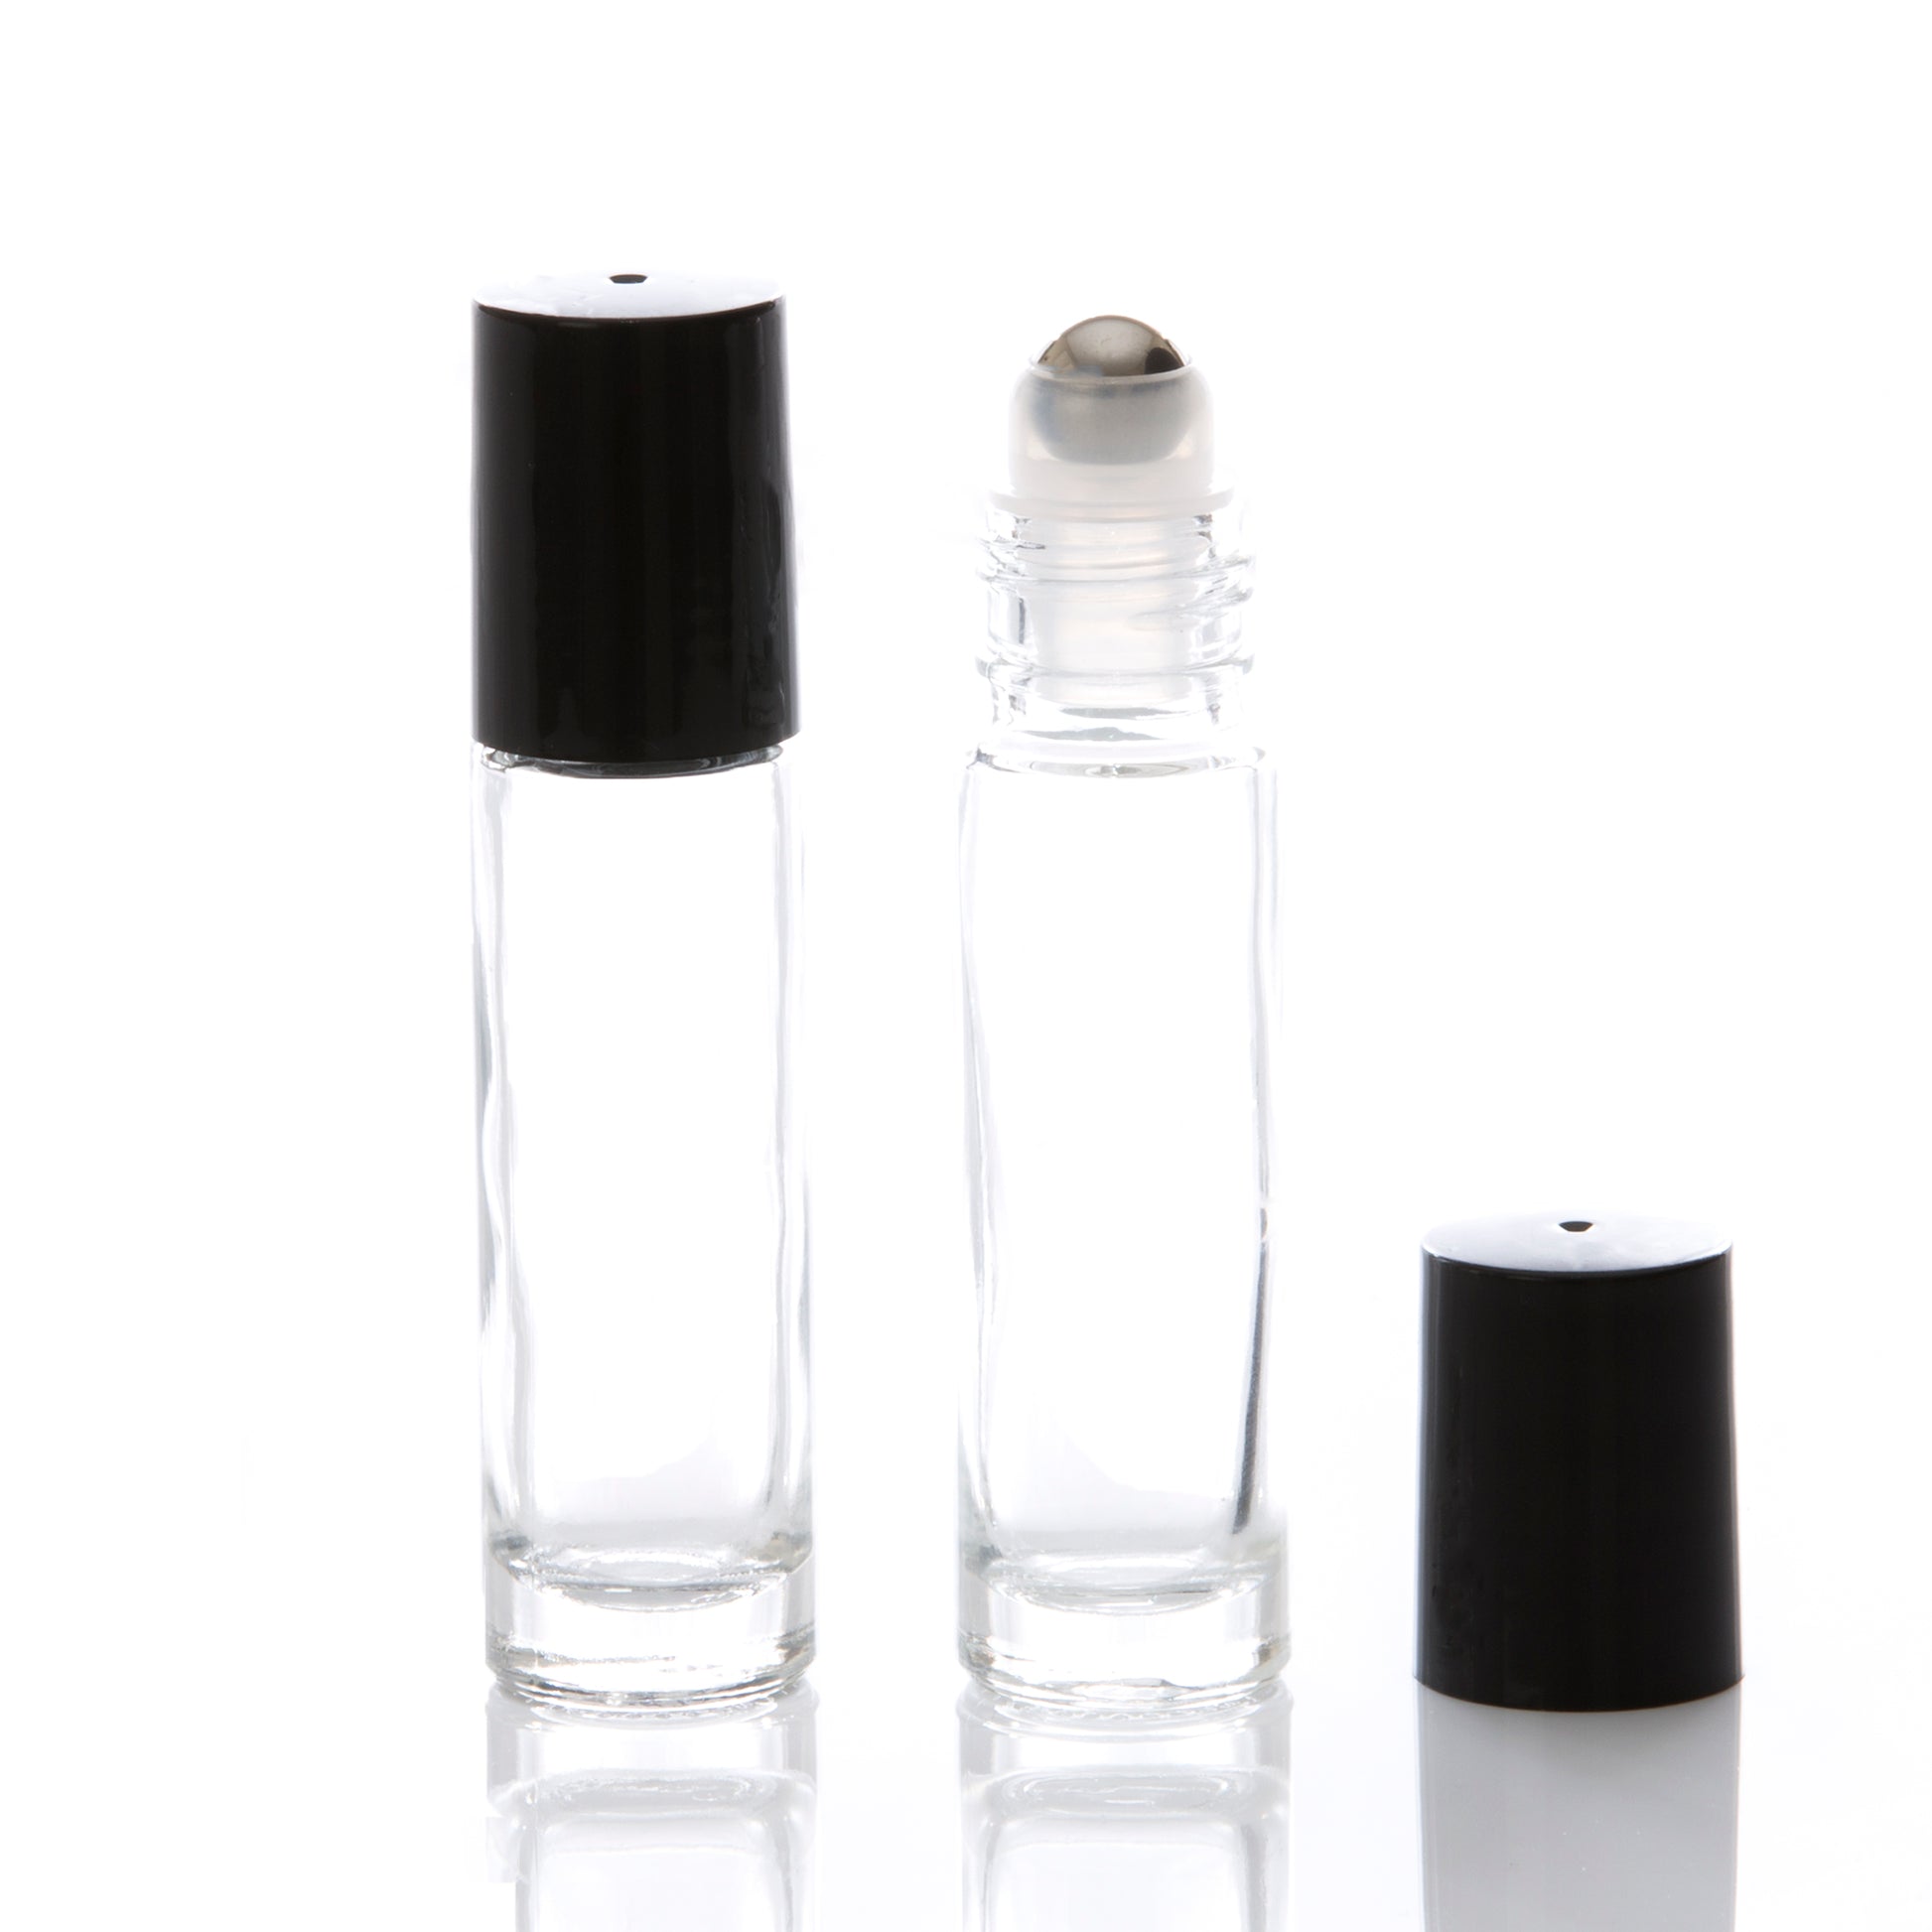 10 ml Clear Glass Rollerball Bottle with Black Cap & Stainless Steel Rollerball